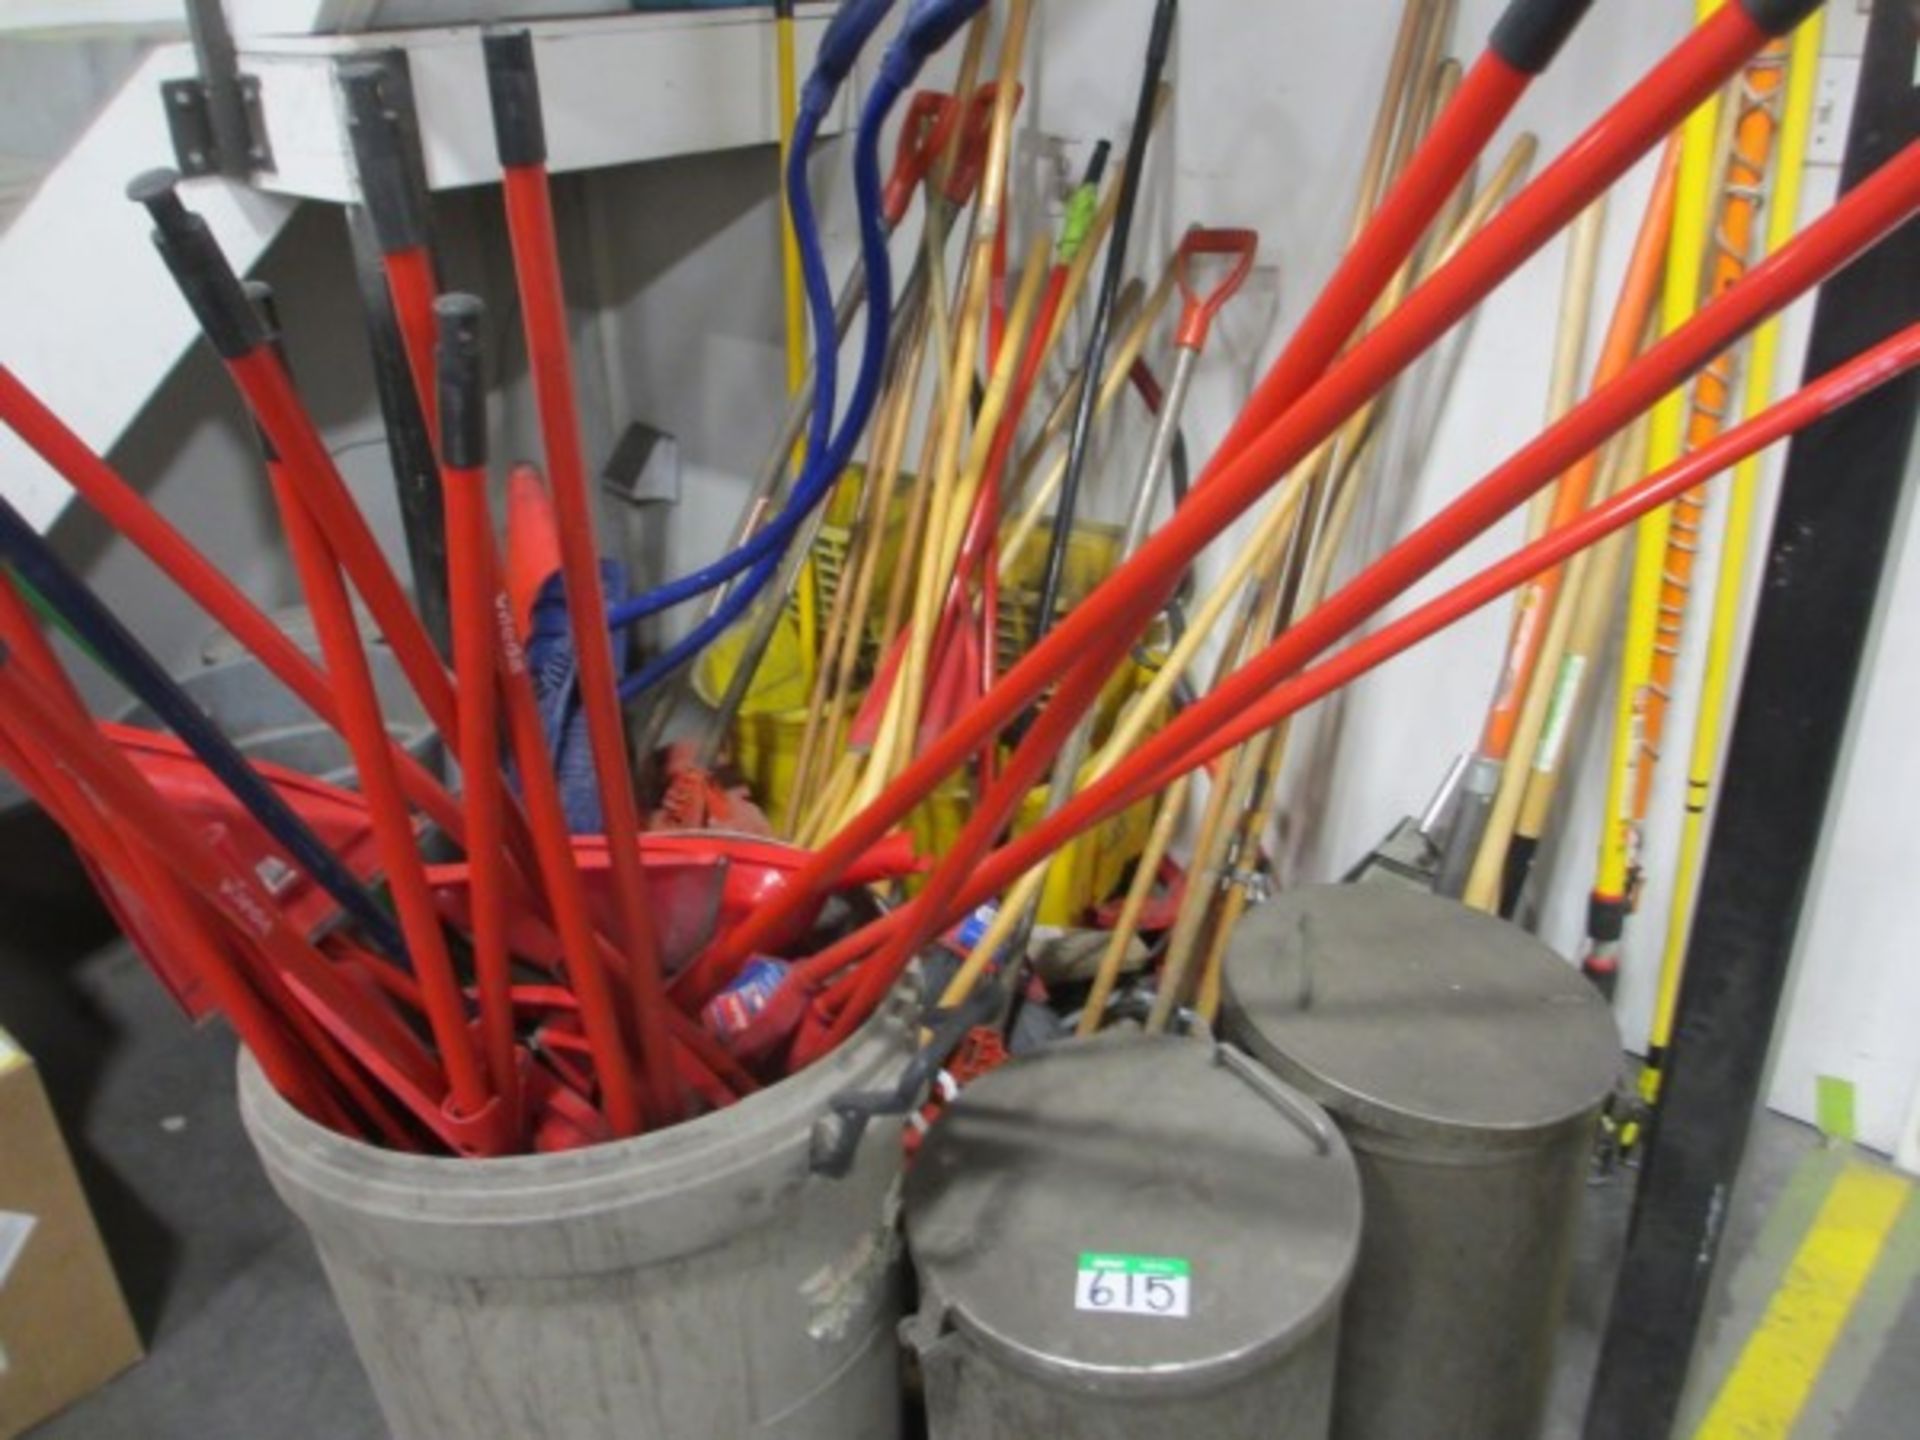 L2: LOT OF JANITOR SUPPLIES, BROOMS, SHOVERLS, WASTE CANS